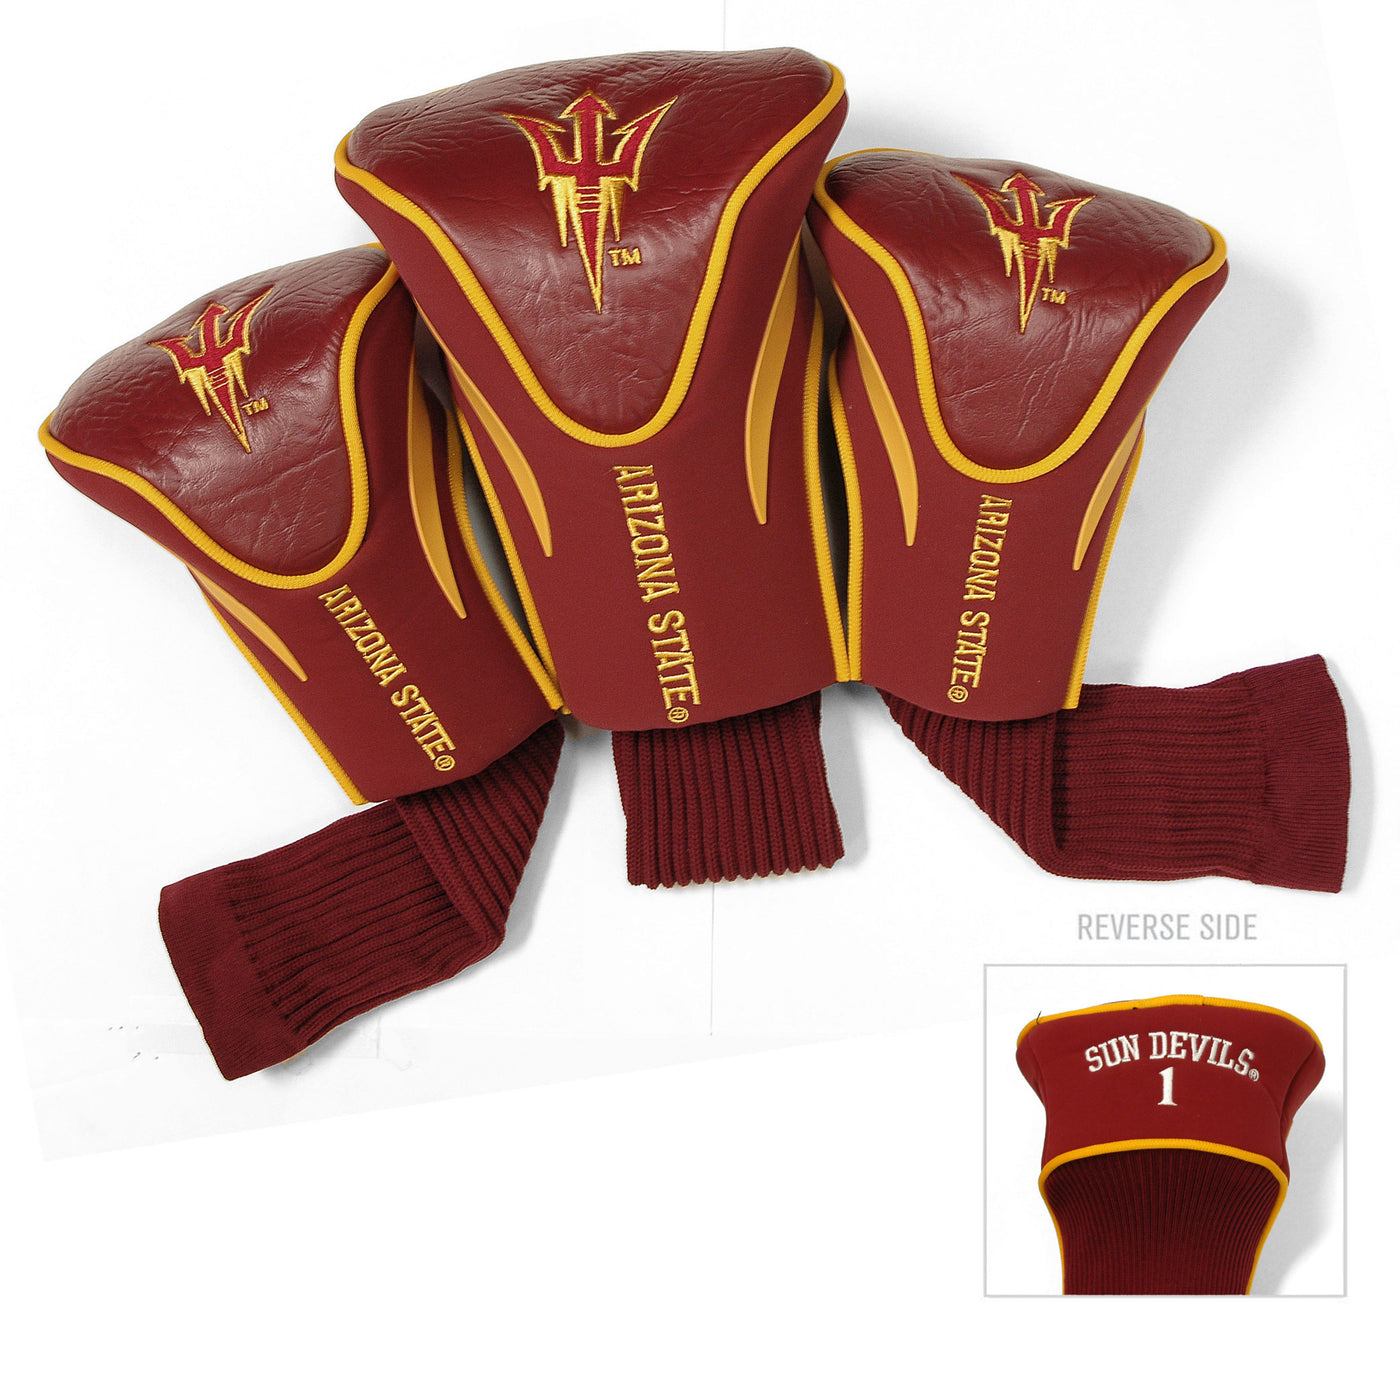 ASU 3 pack of golf club head covers with maroon leather like embroidered material at the top with a pitchfork at the top, 'Arizona State' down the neck and gold detailing with a cloth material at the base